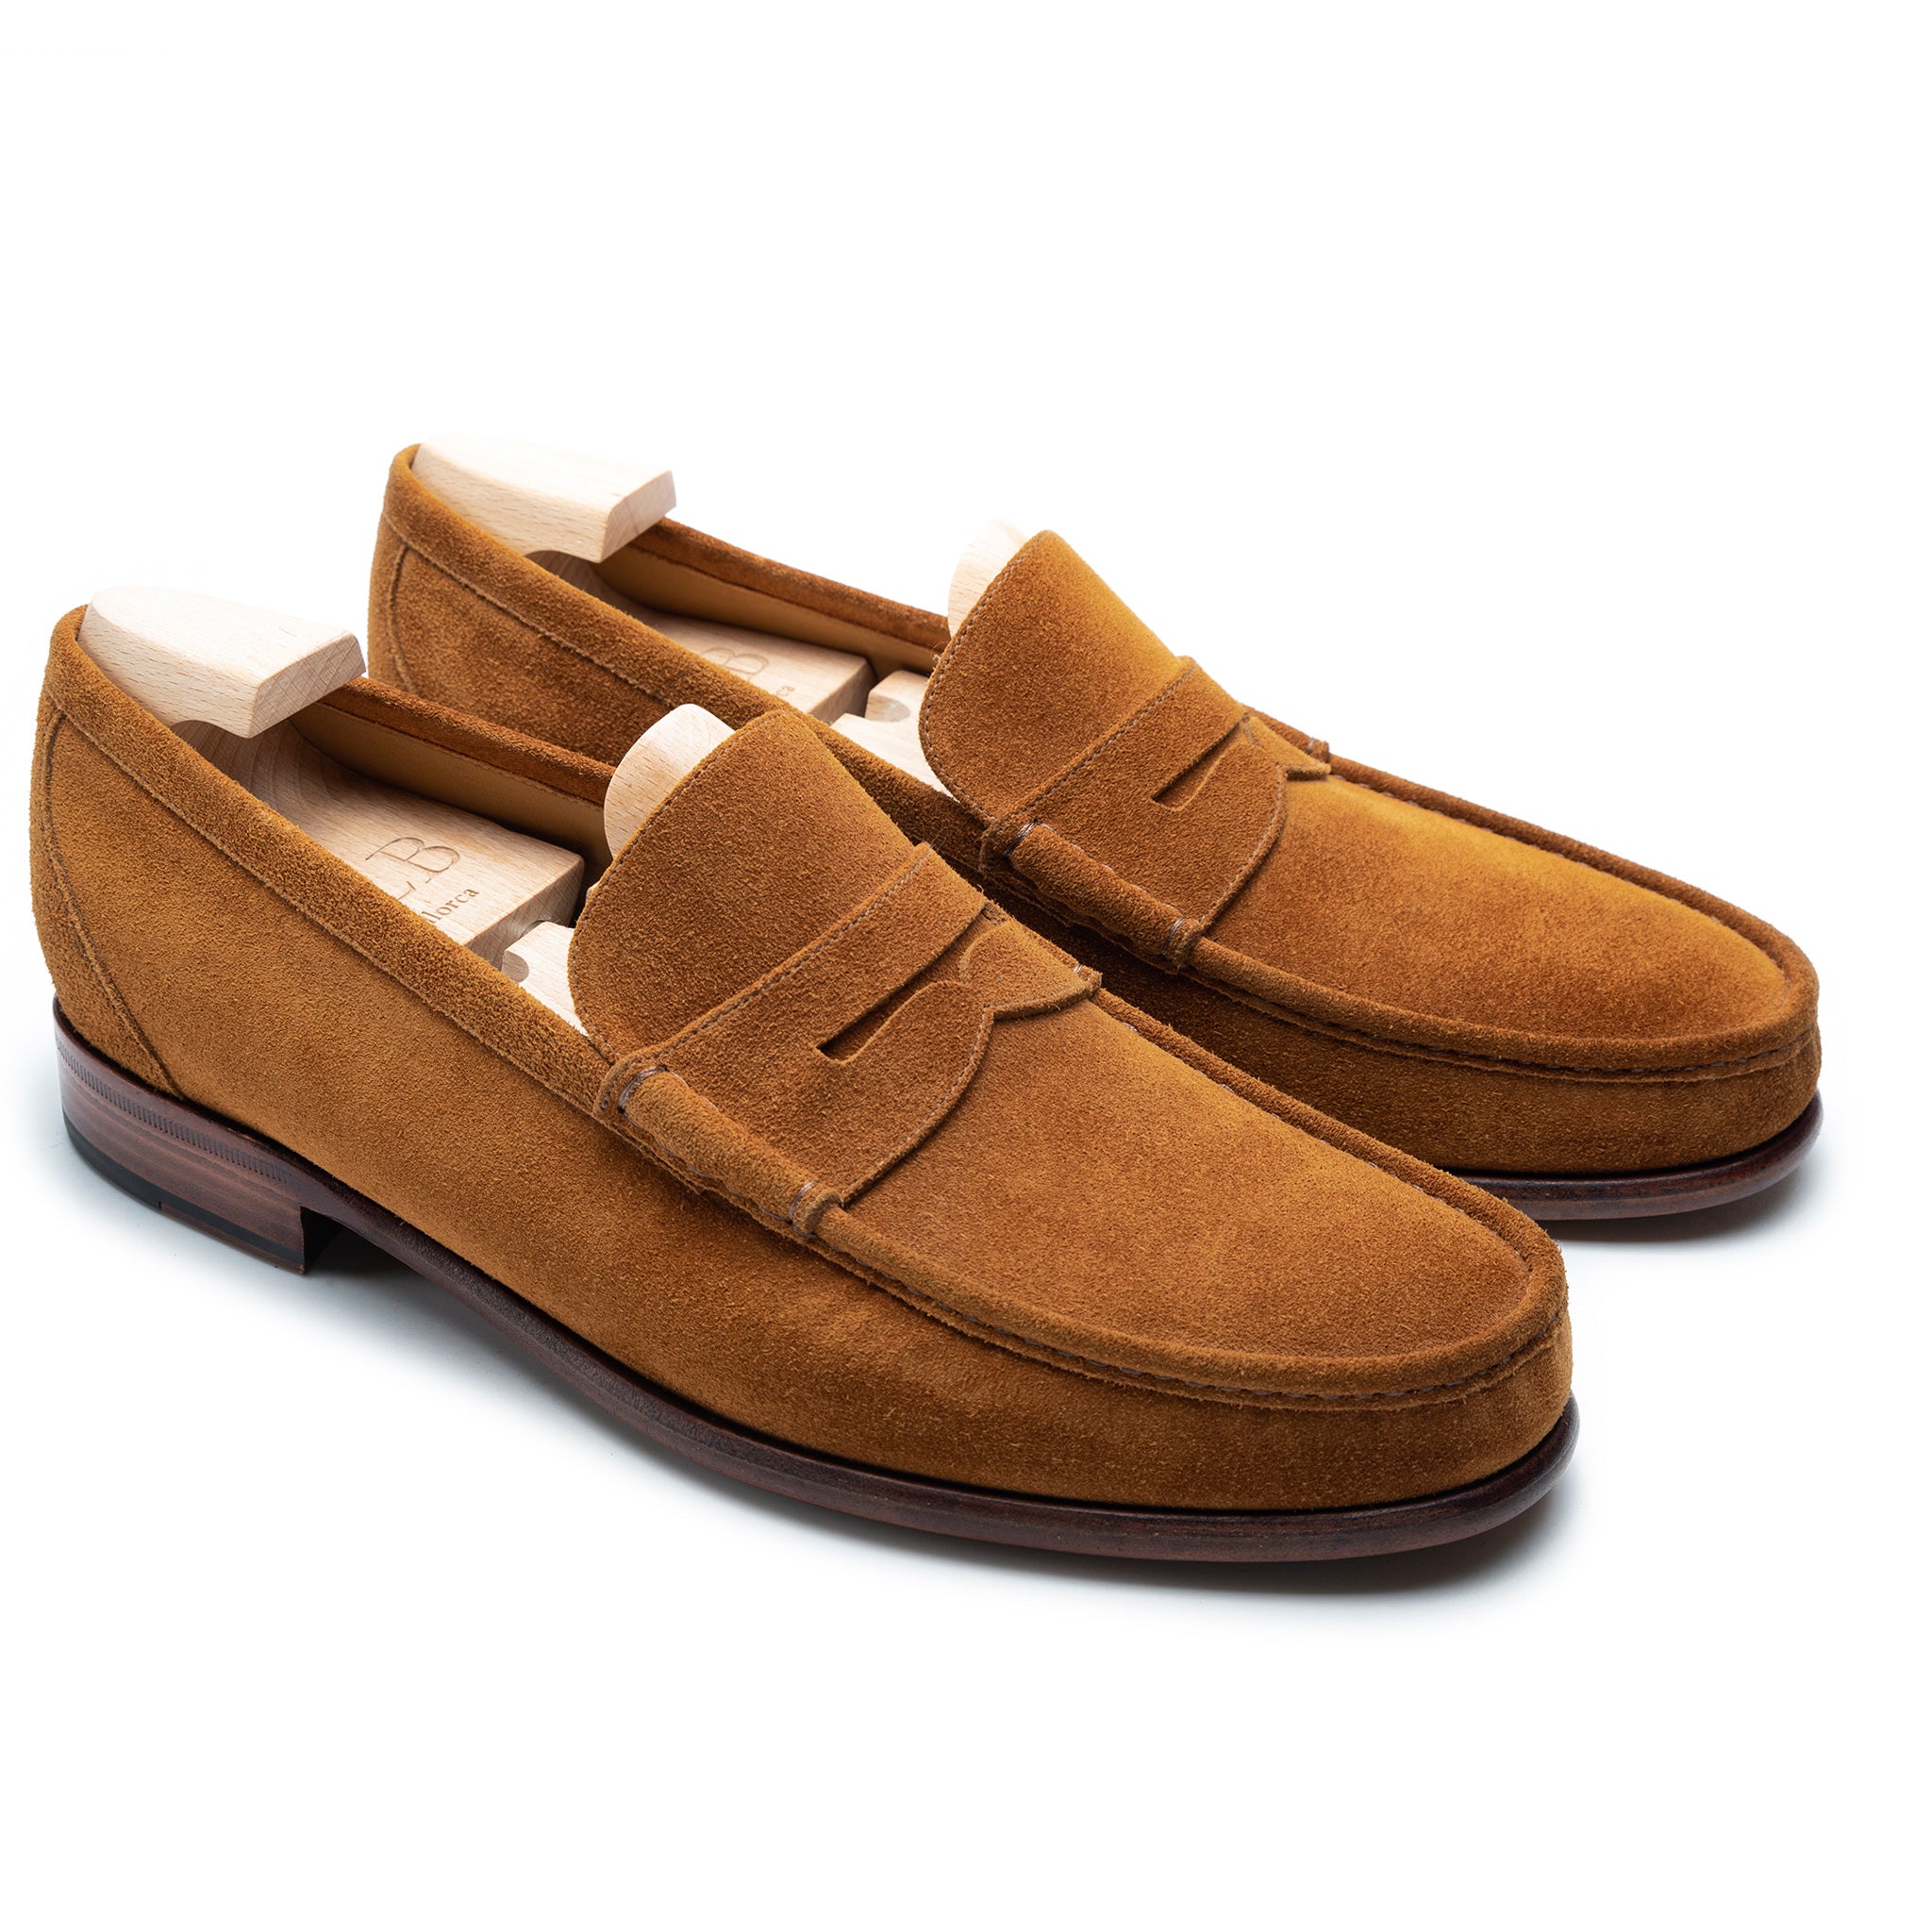 TLB Mallorca Oxford loafers | Men's Oxford shoes | Model 2510 suede brown